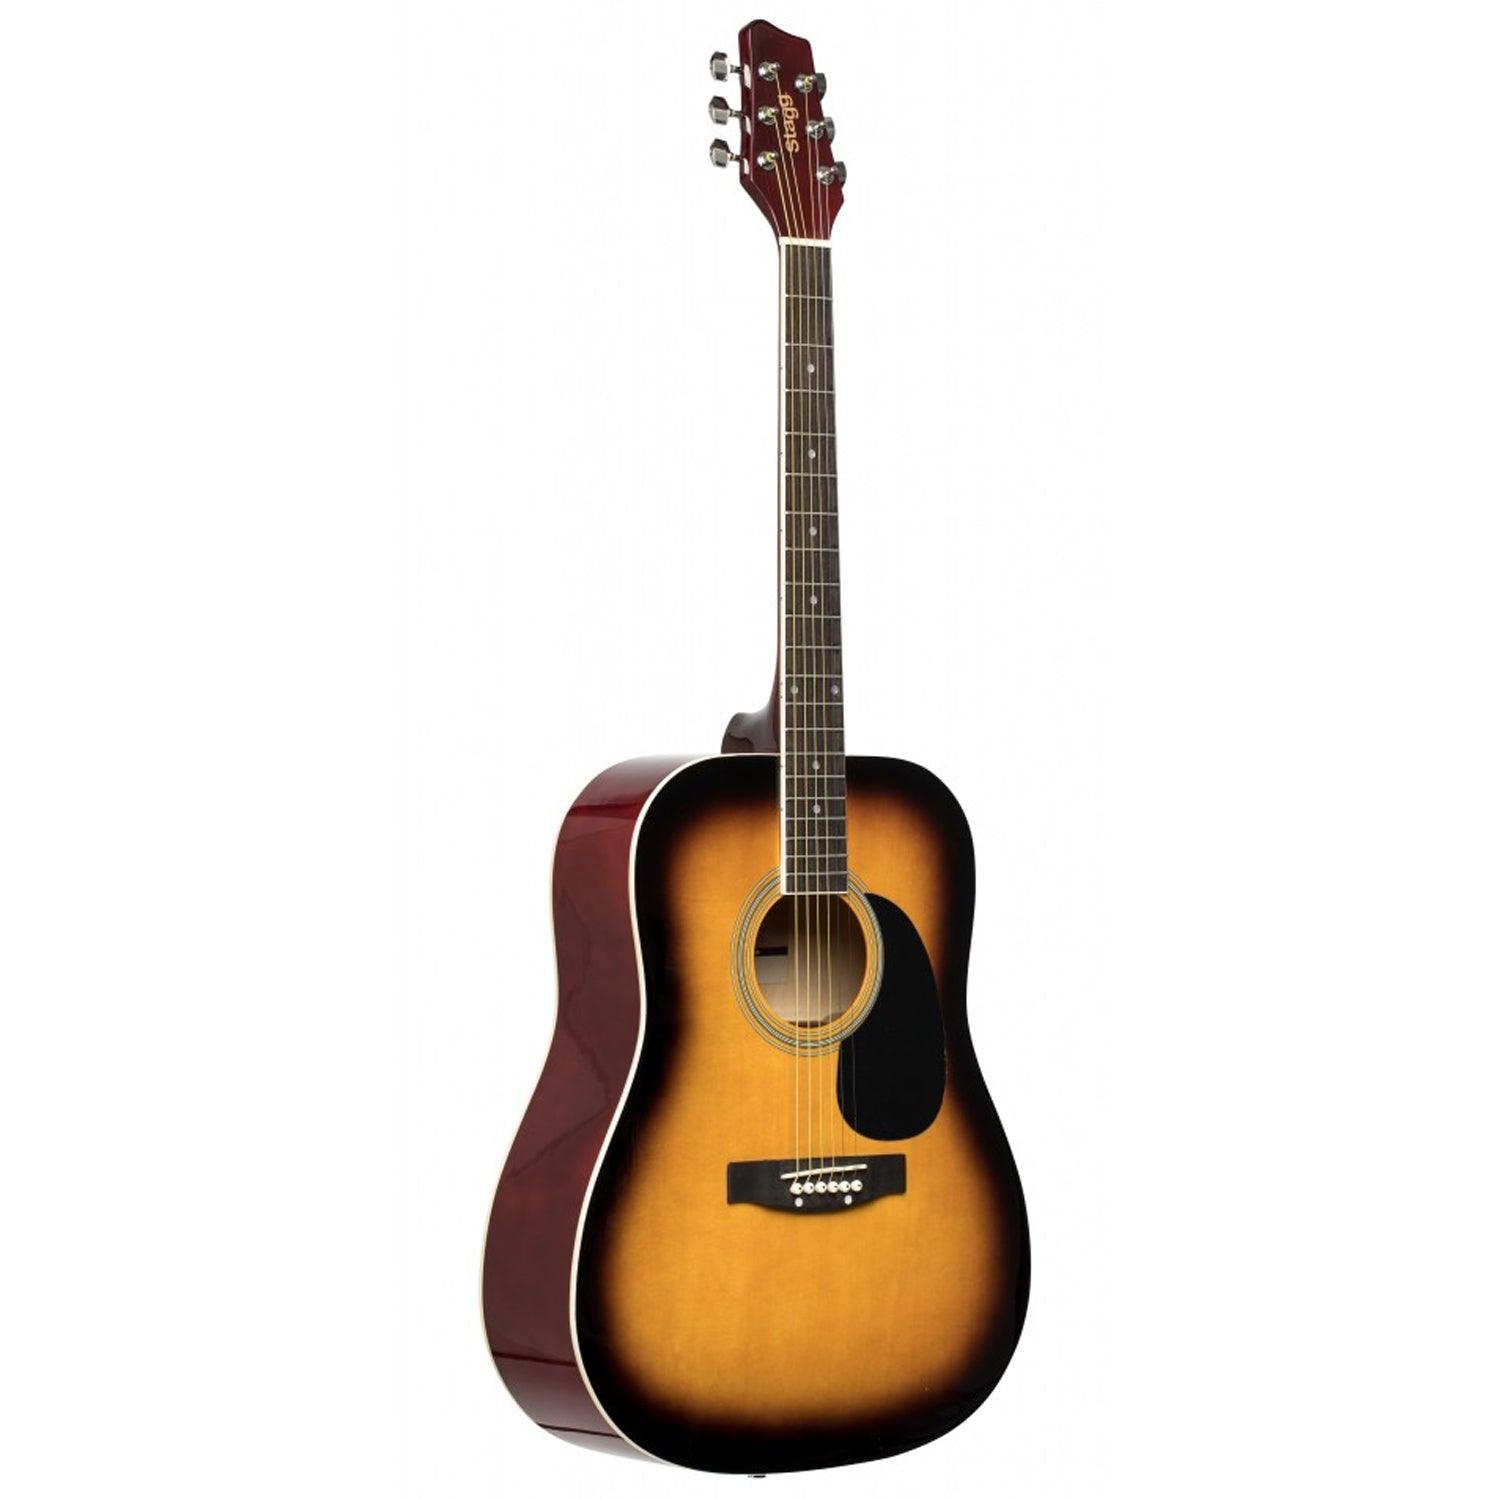 Stagg SA20D SNB Sunburst Dreadnought Acoustic Guitar with Basswood Top - DY Pro Audio